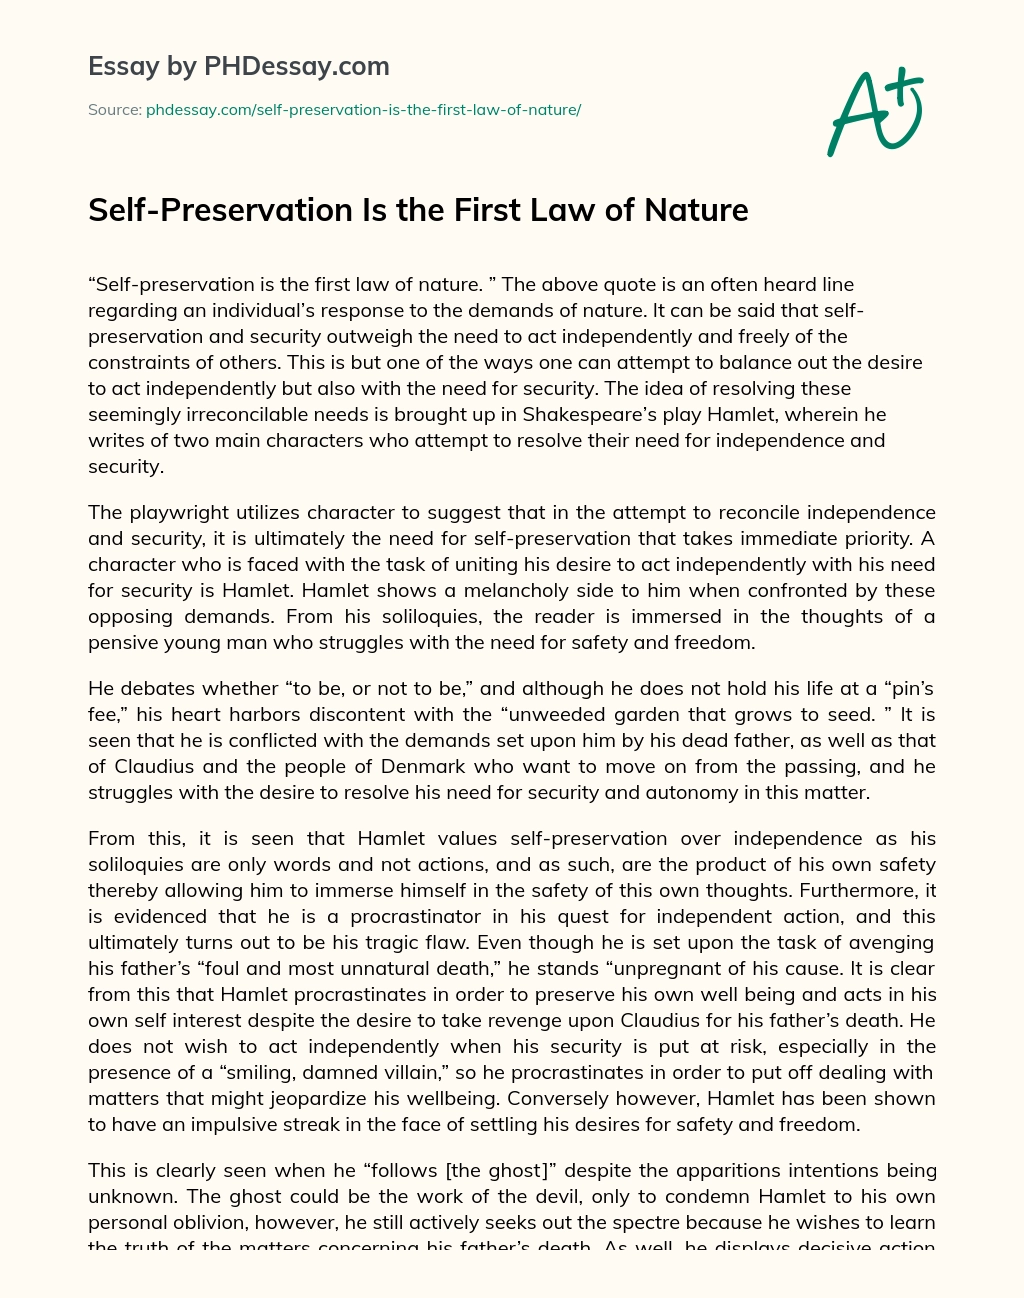 Self-Preservation Is the First Law of Nature essay